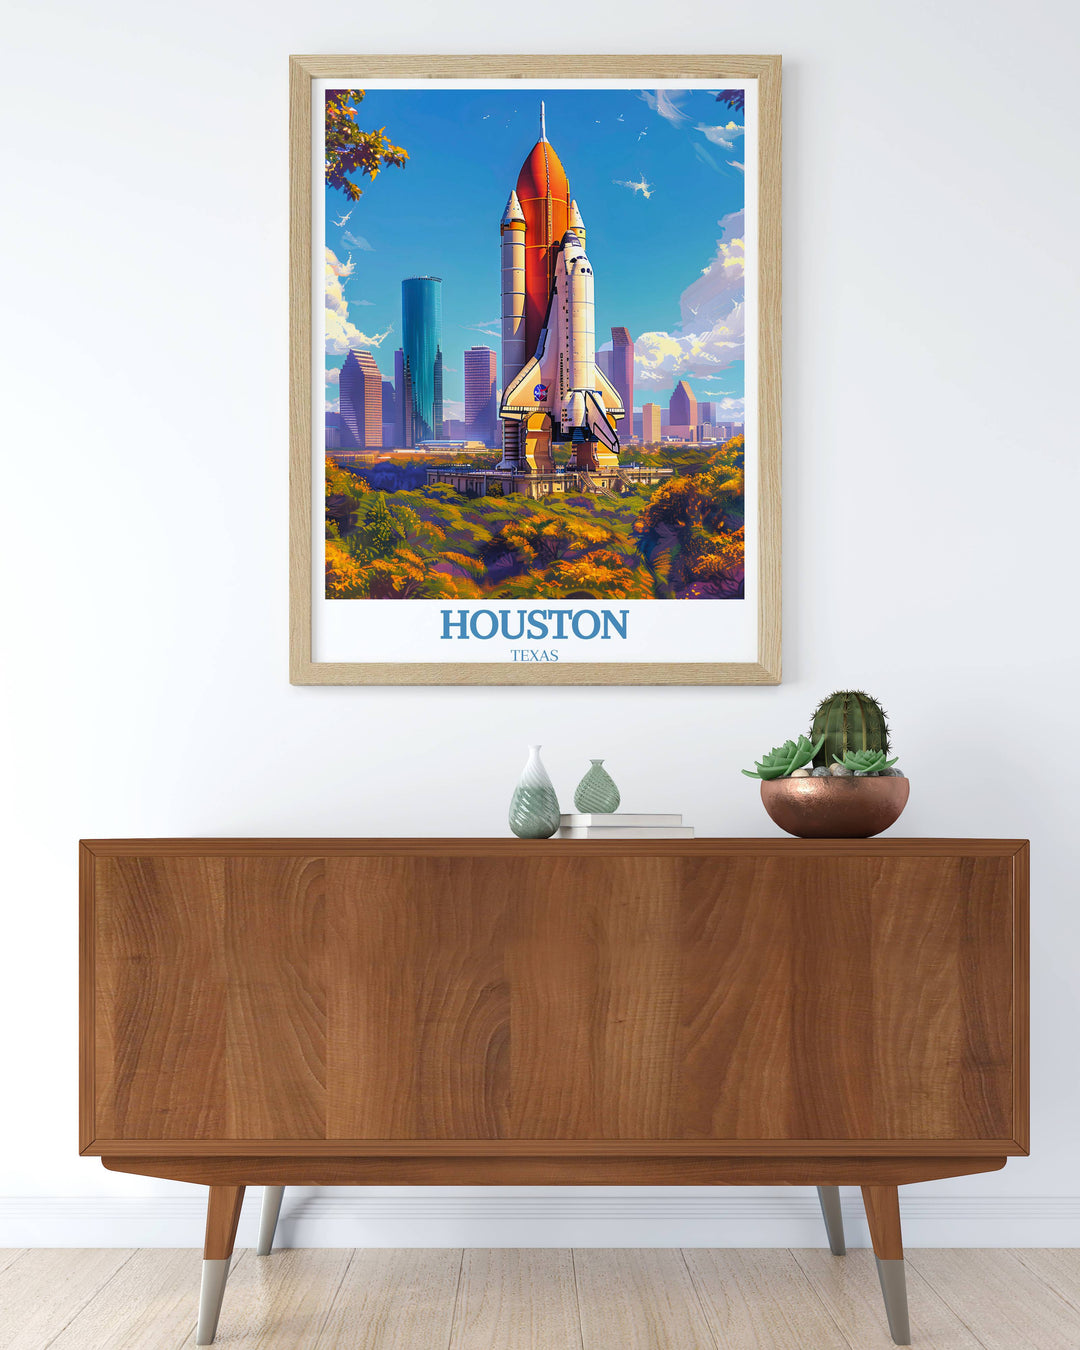 Colorful map of Houston highlighting major attractions and districts, designed in a playful, artistic style, perfect for educational purposes or as a fun wall decor.